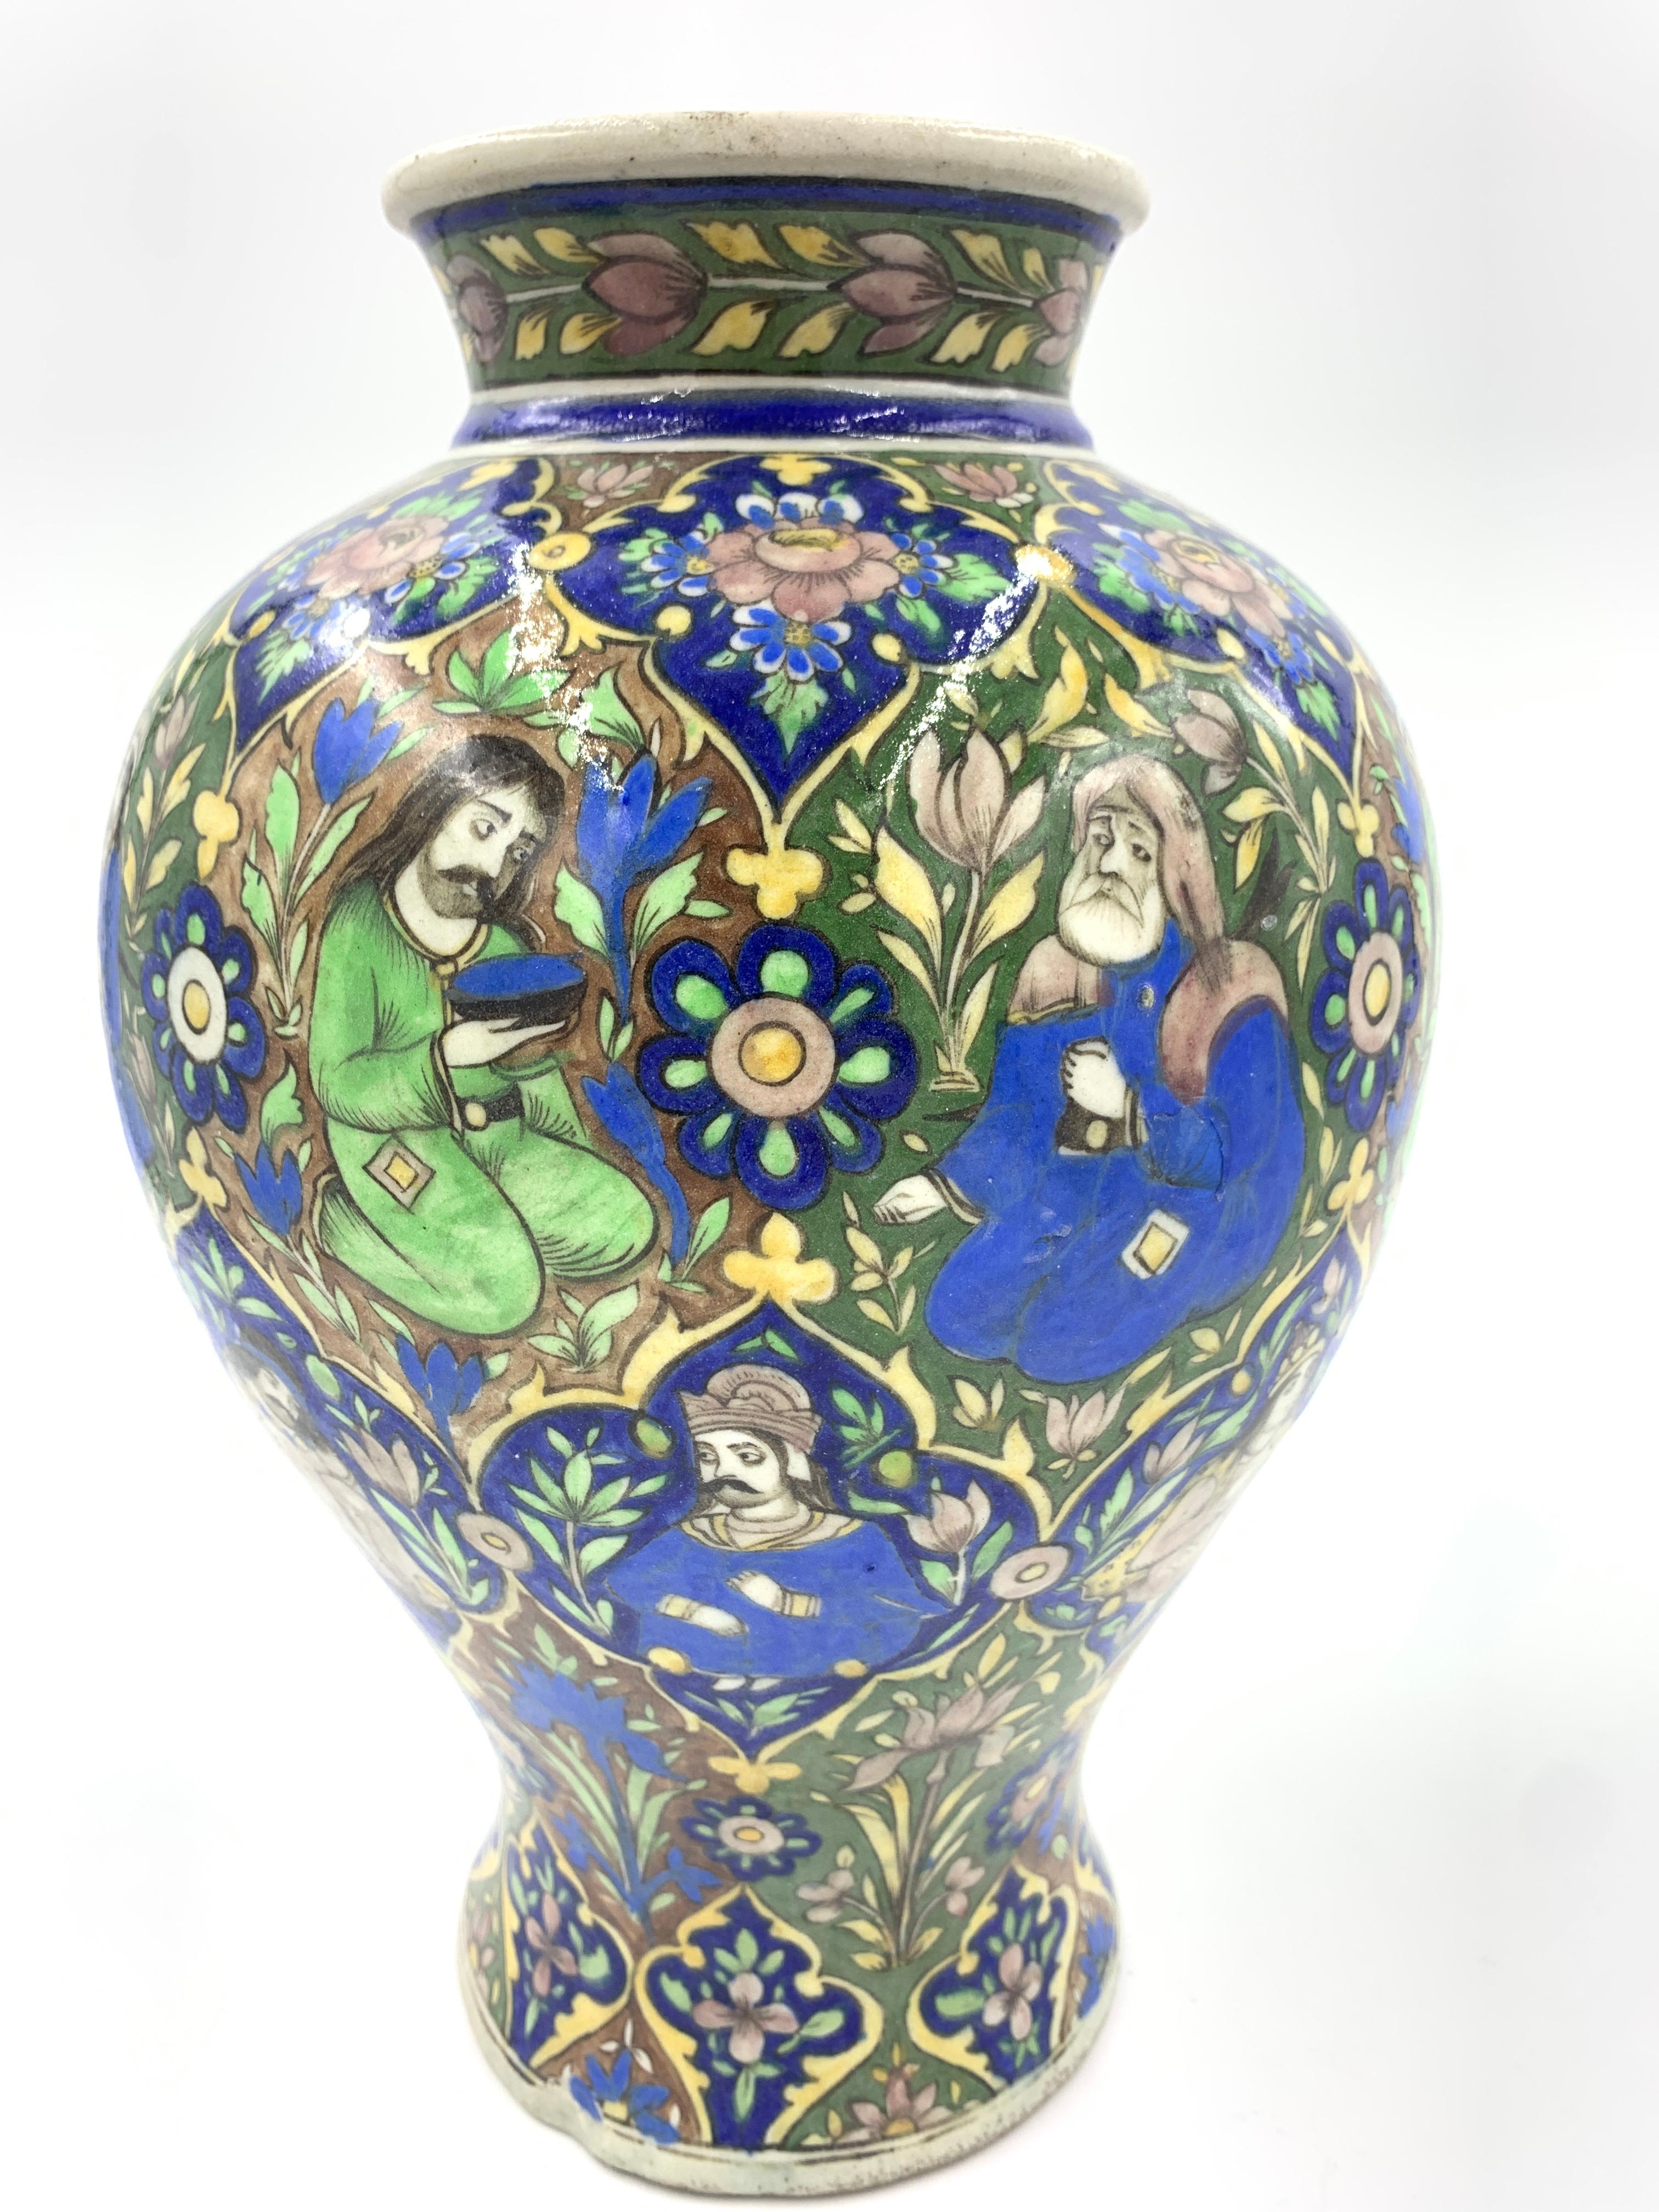 Porcelain Pair of Qajar Vases with Floral Design, 19th Century